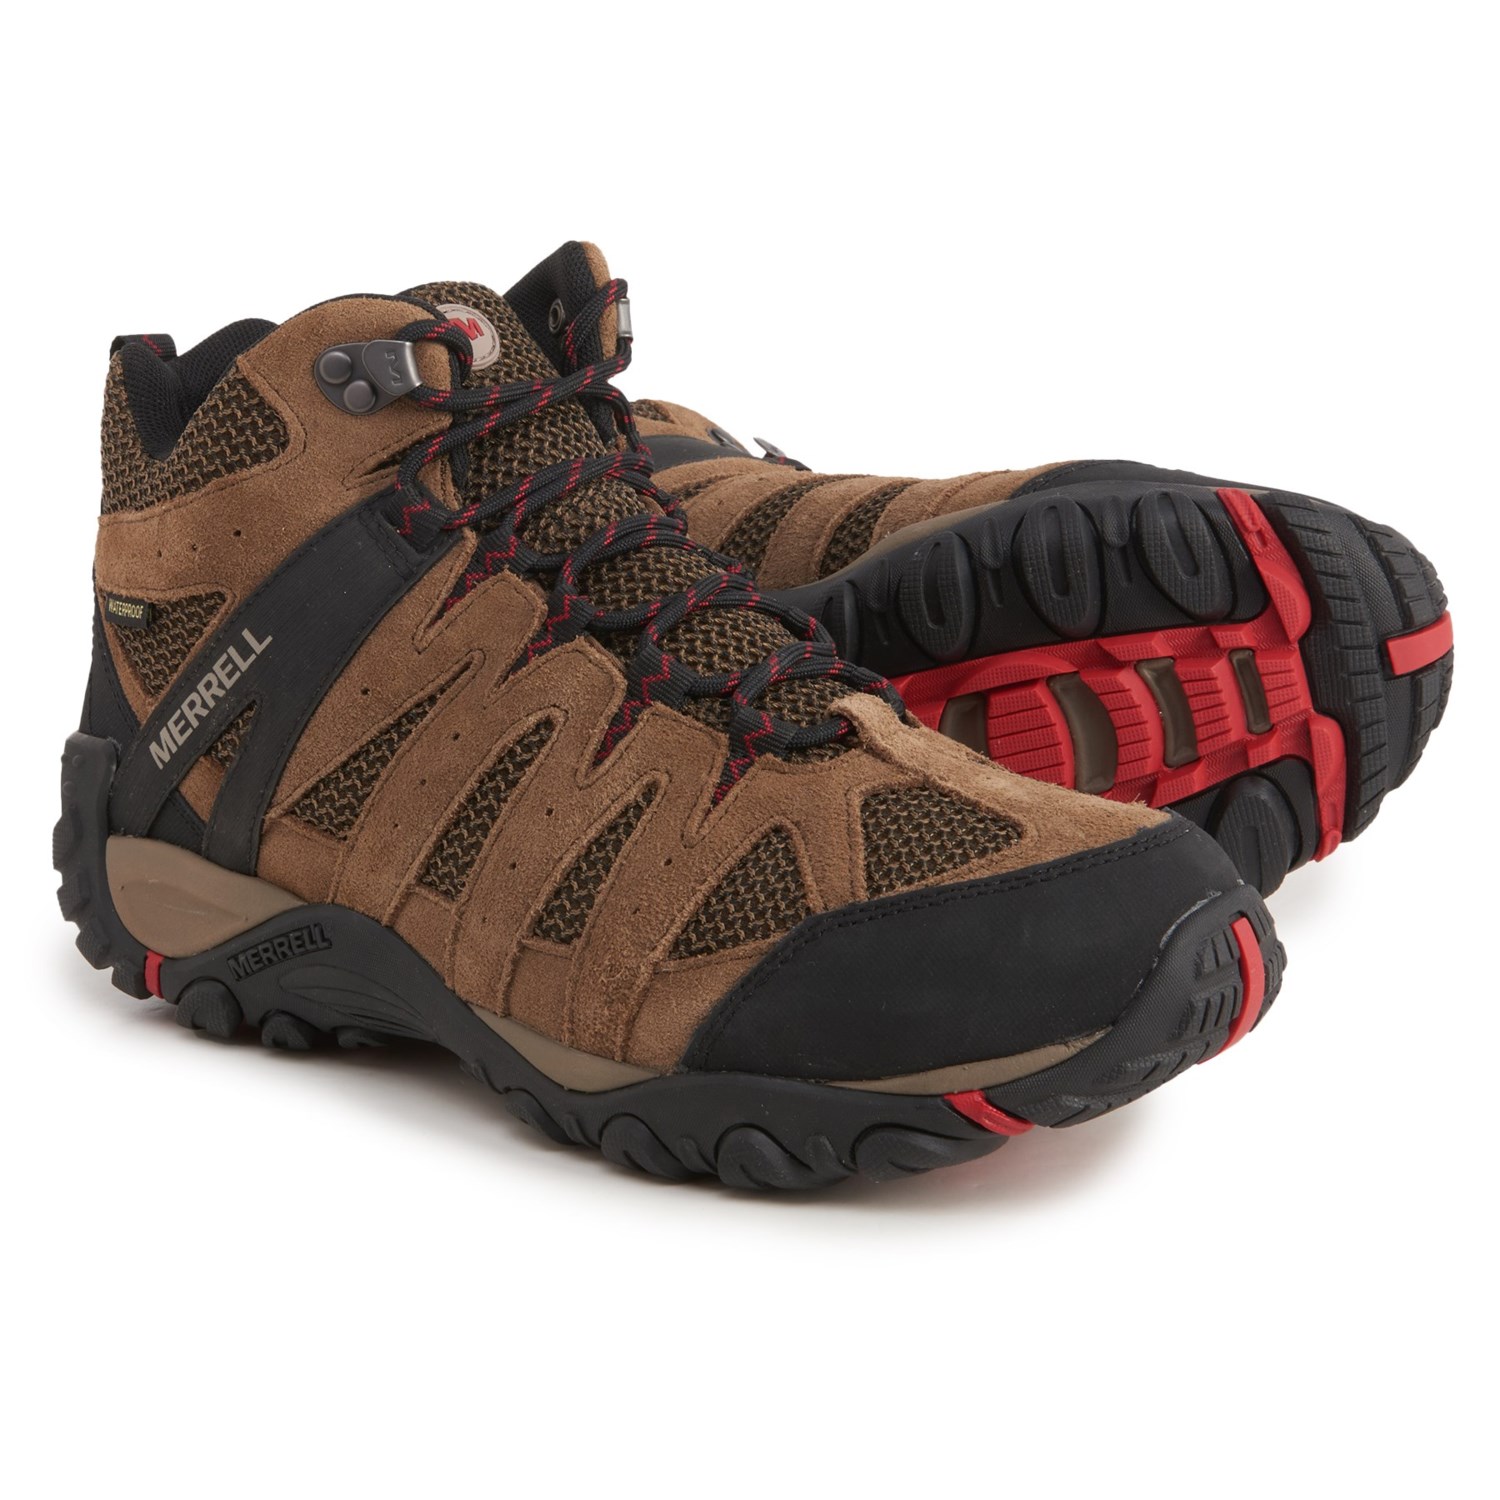 Merrell Accentor 2 Mid Vent Hiking Boots (For Men) - Save 27%